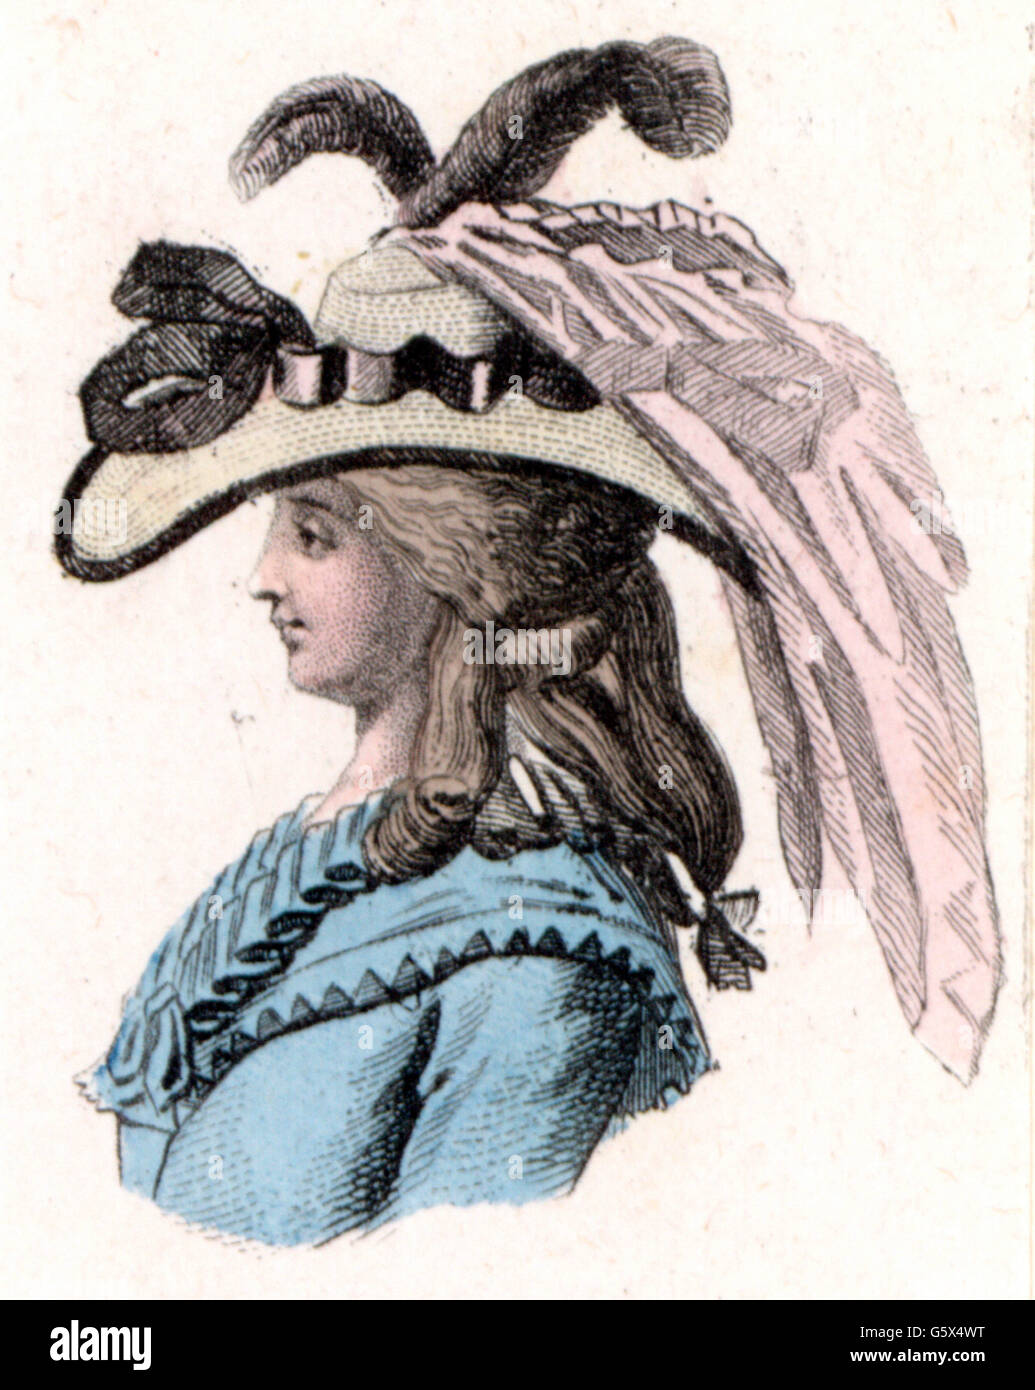 fashion, 18th century, woman with hat, Paris, 1787, Additional-Rights-Clearences-Not Available Stock Photo